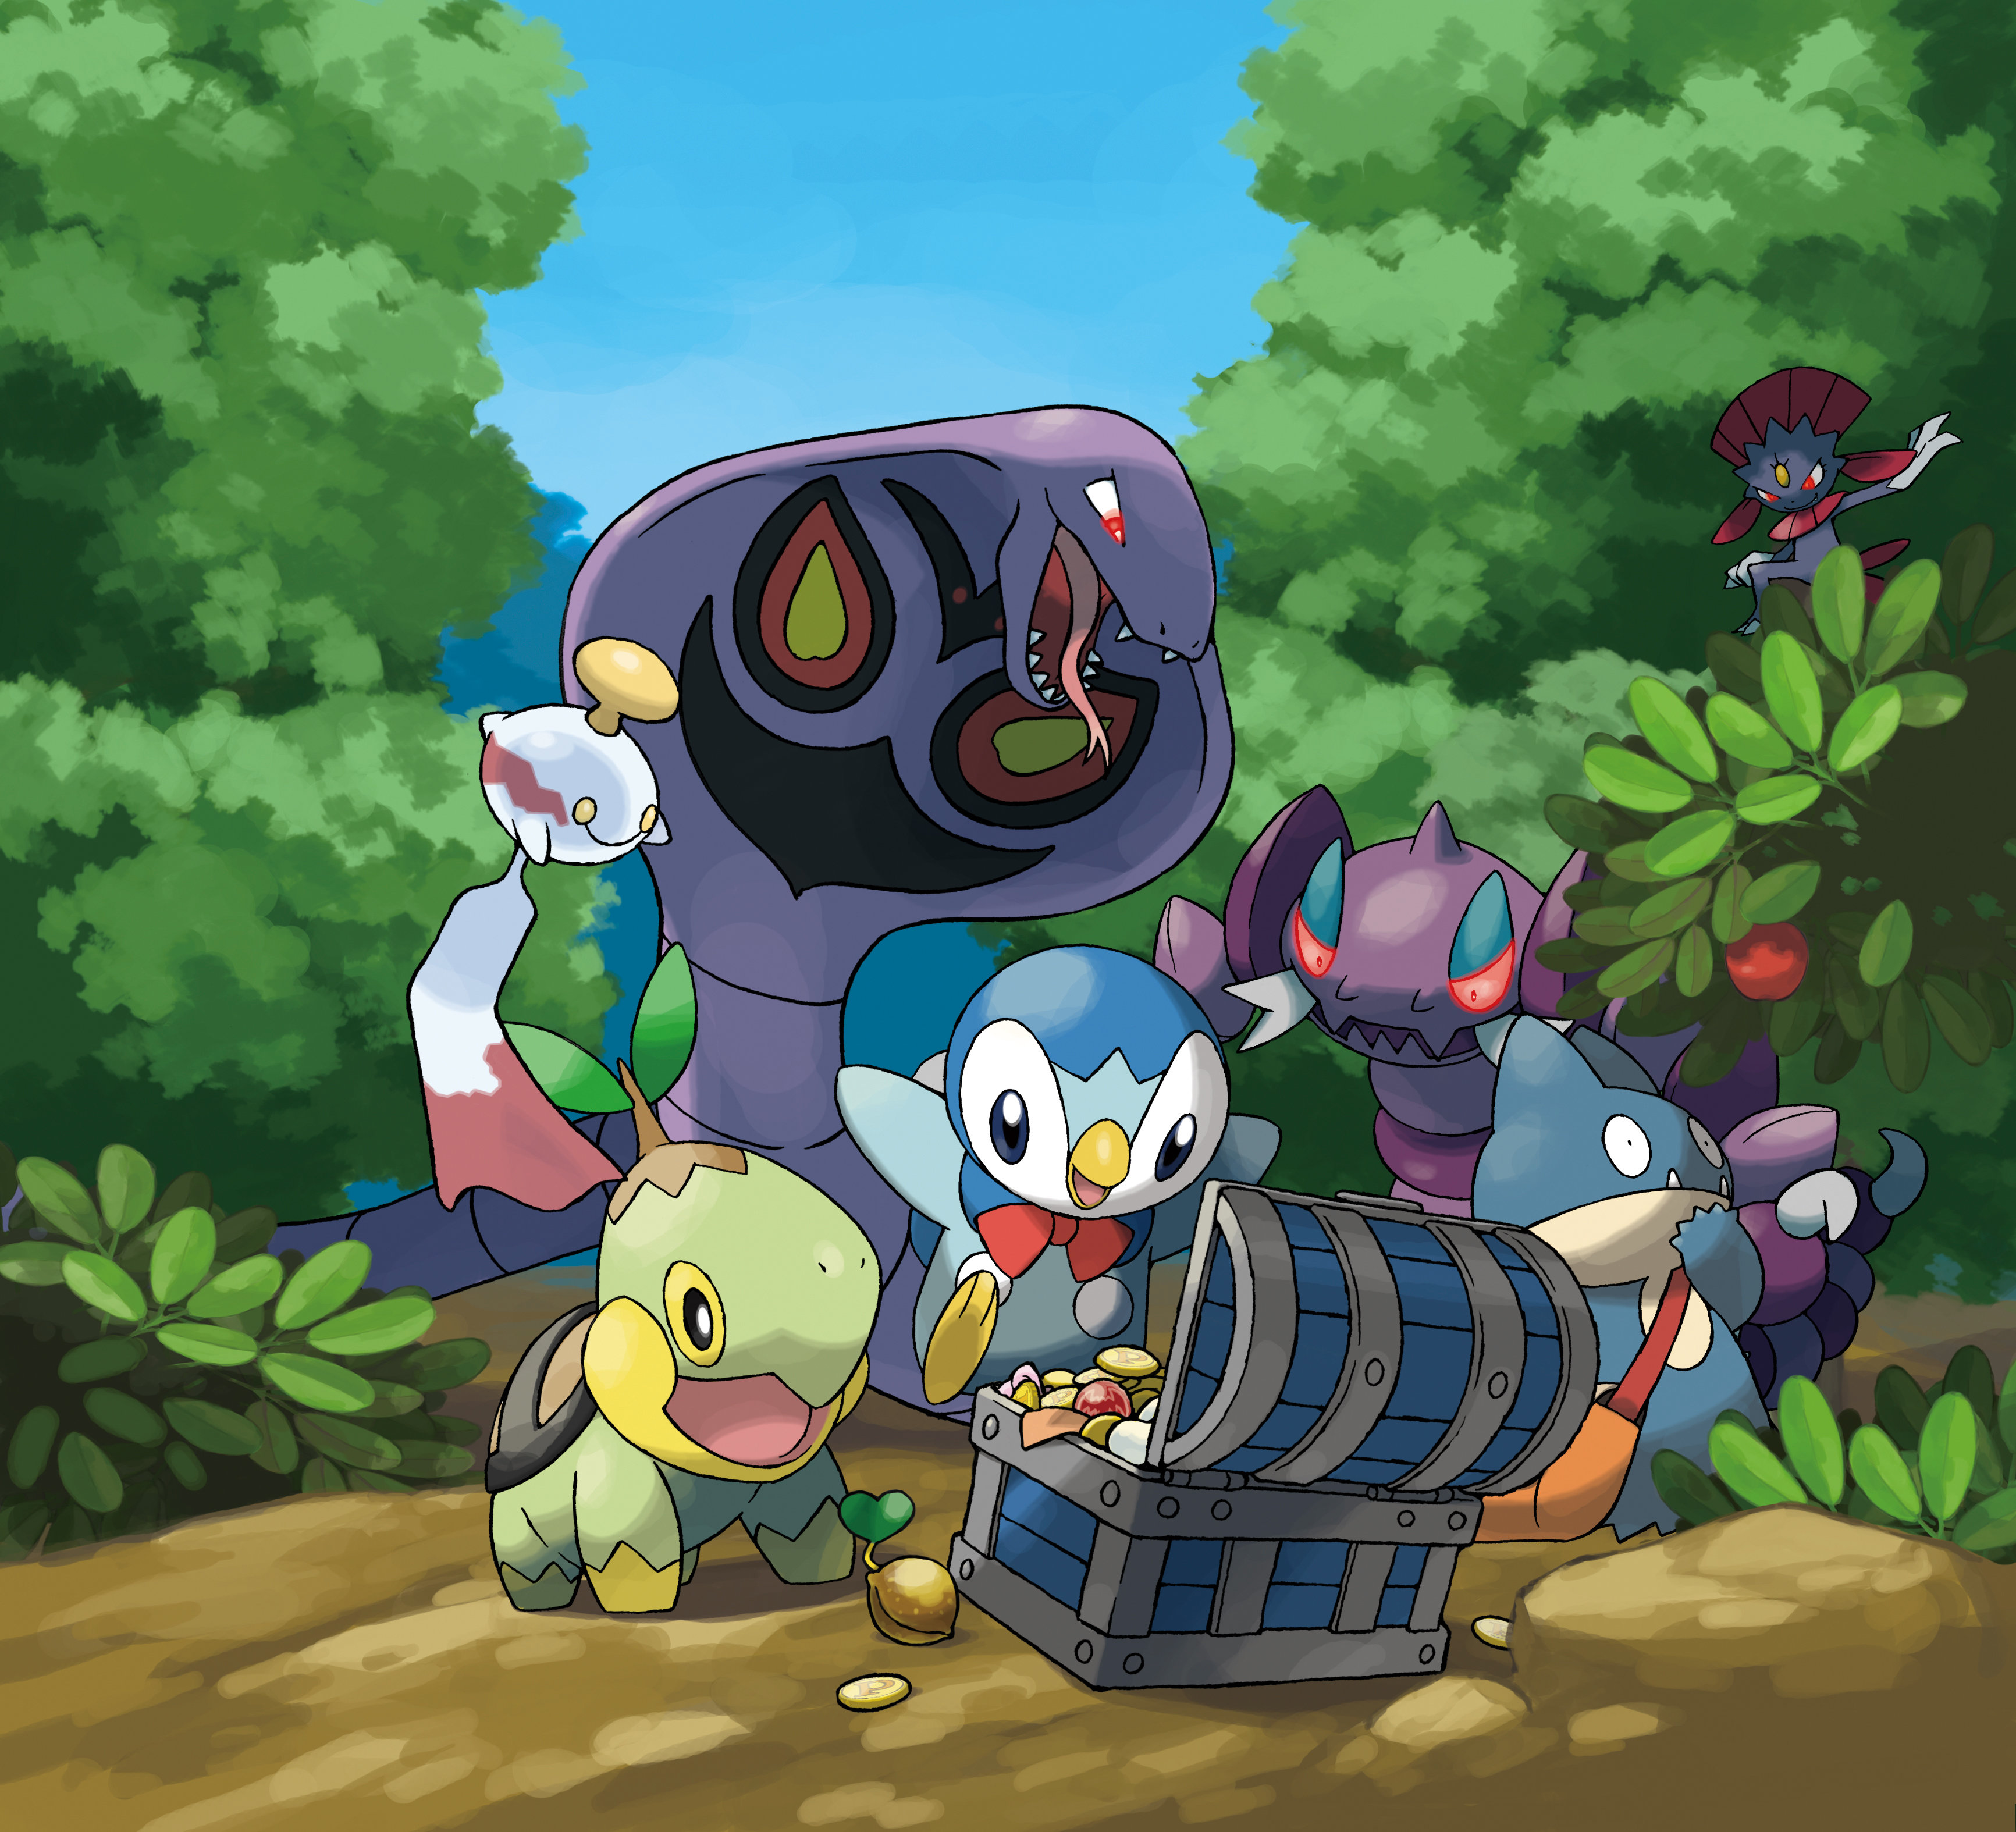 Pokémon Mystery Dungeon Explorers Of Time Details LaunchBox Games.